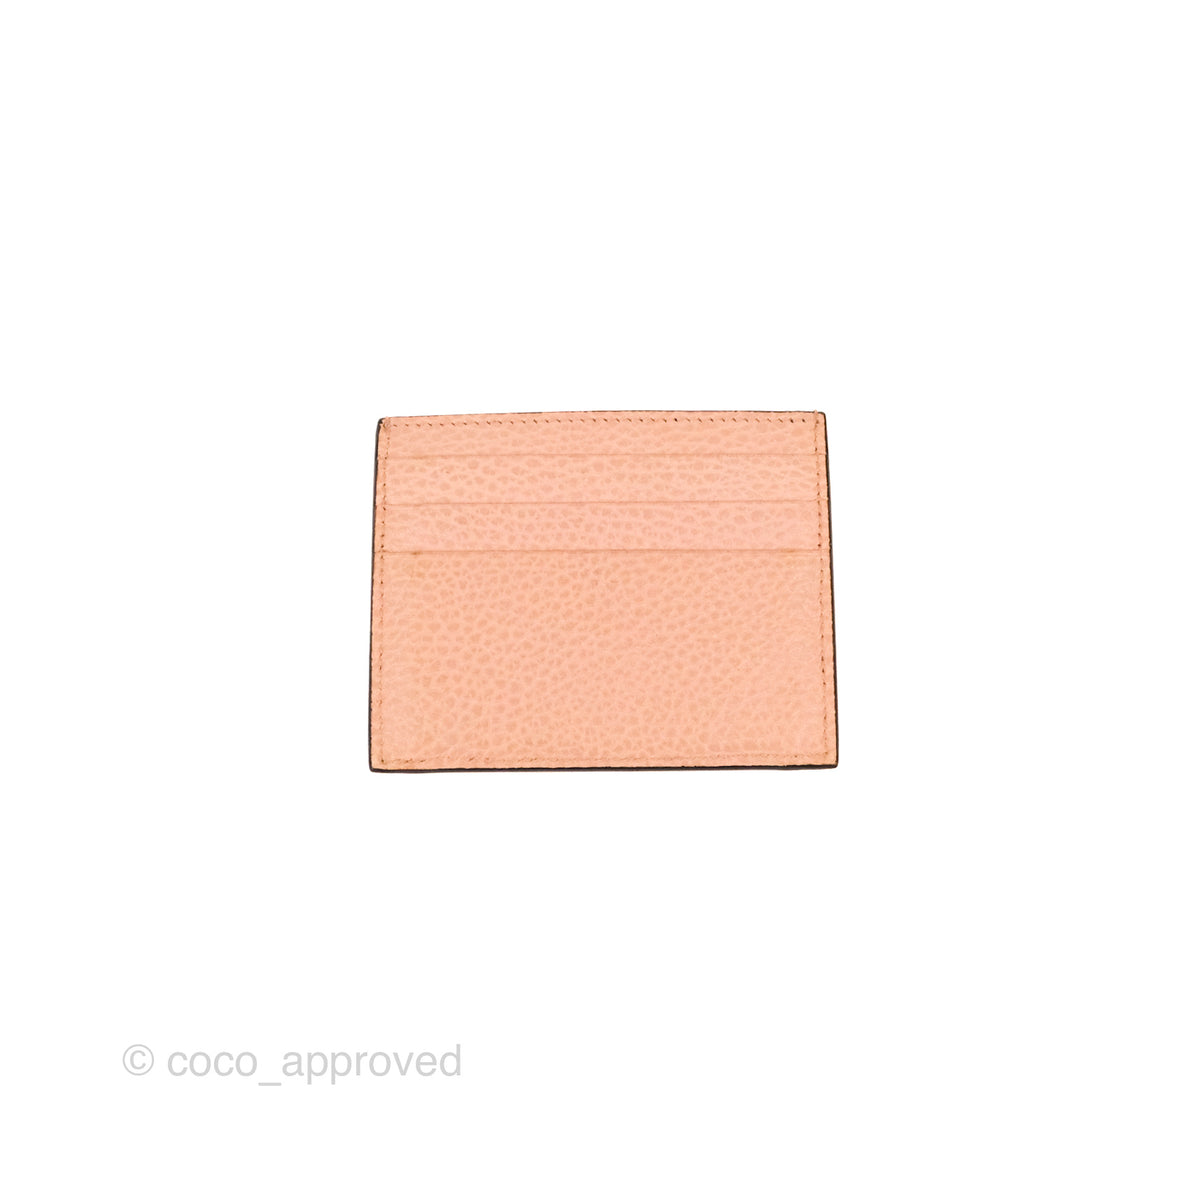 Louis Vuitton SLG Card Holder Pink Leather, New in Box